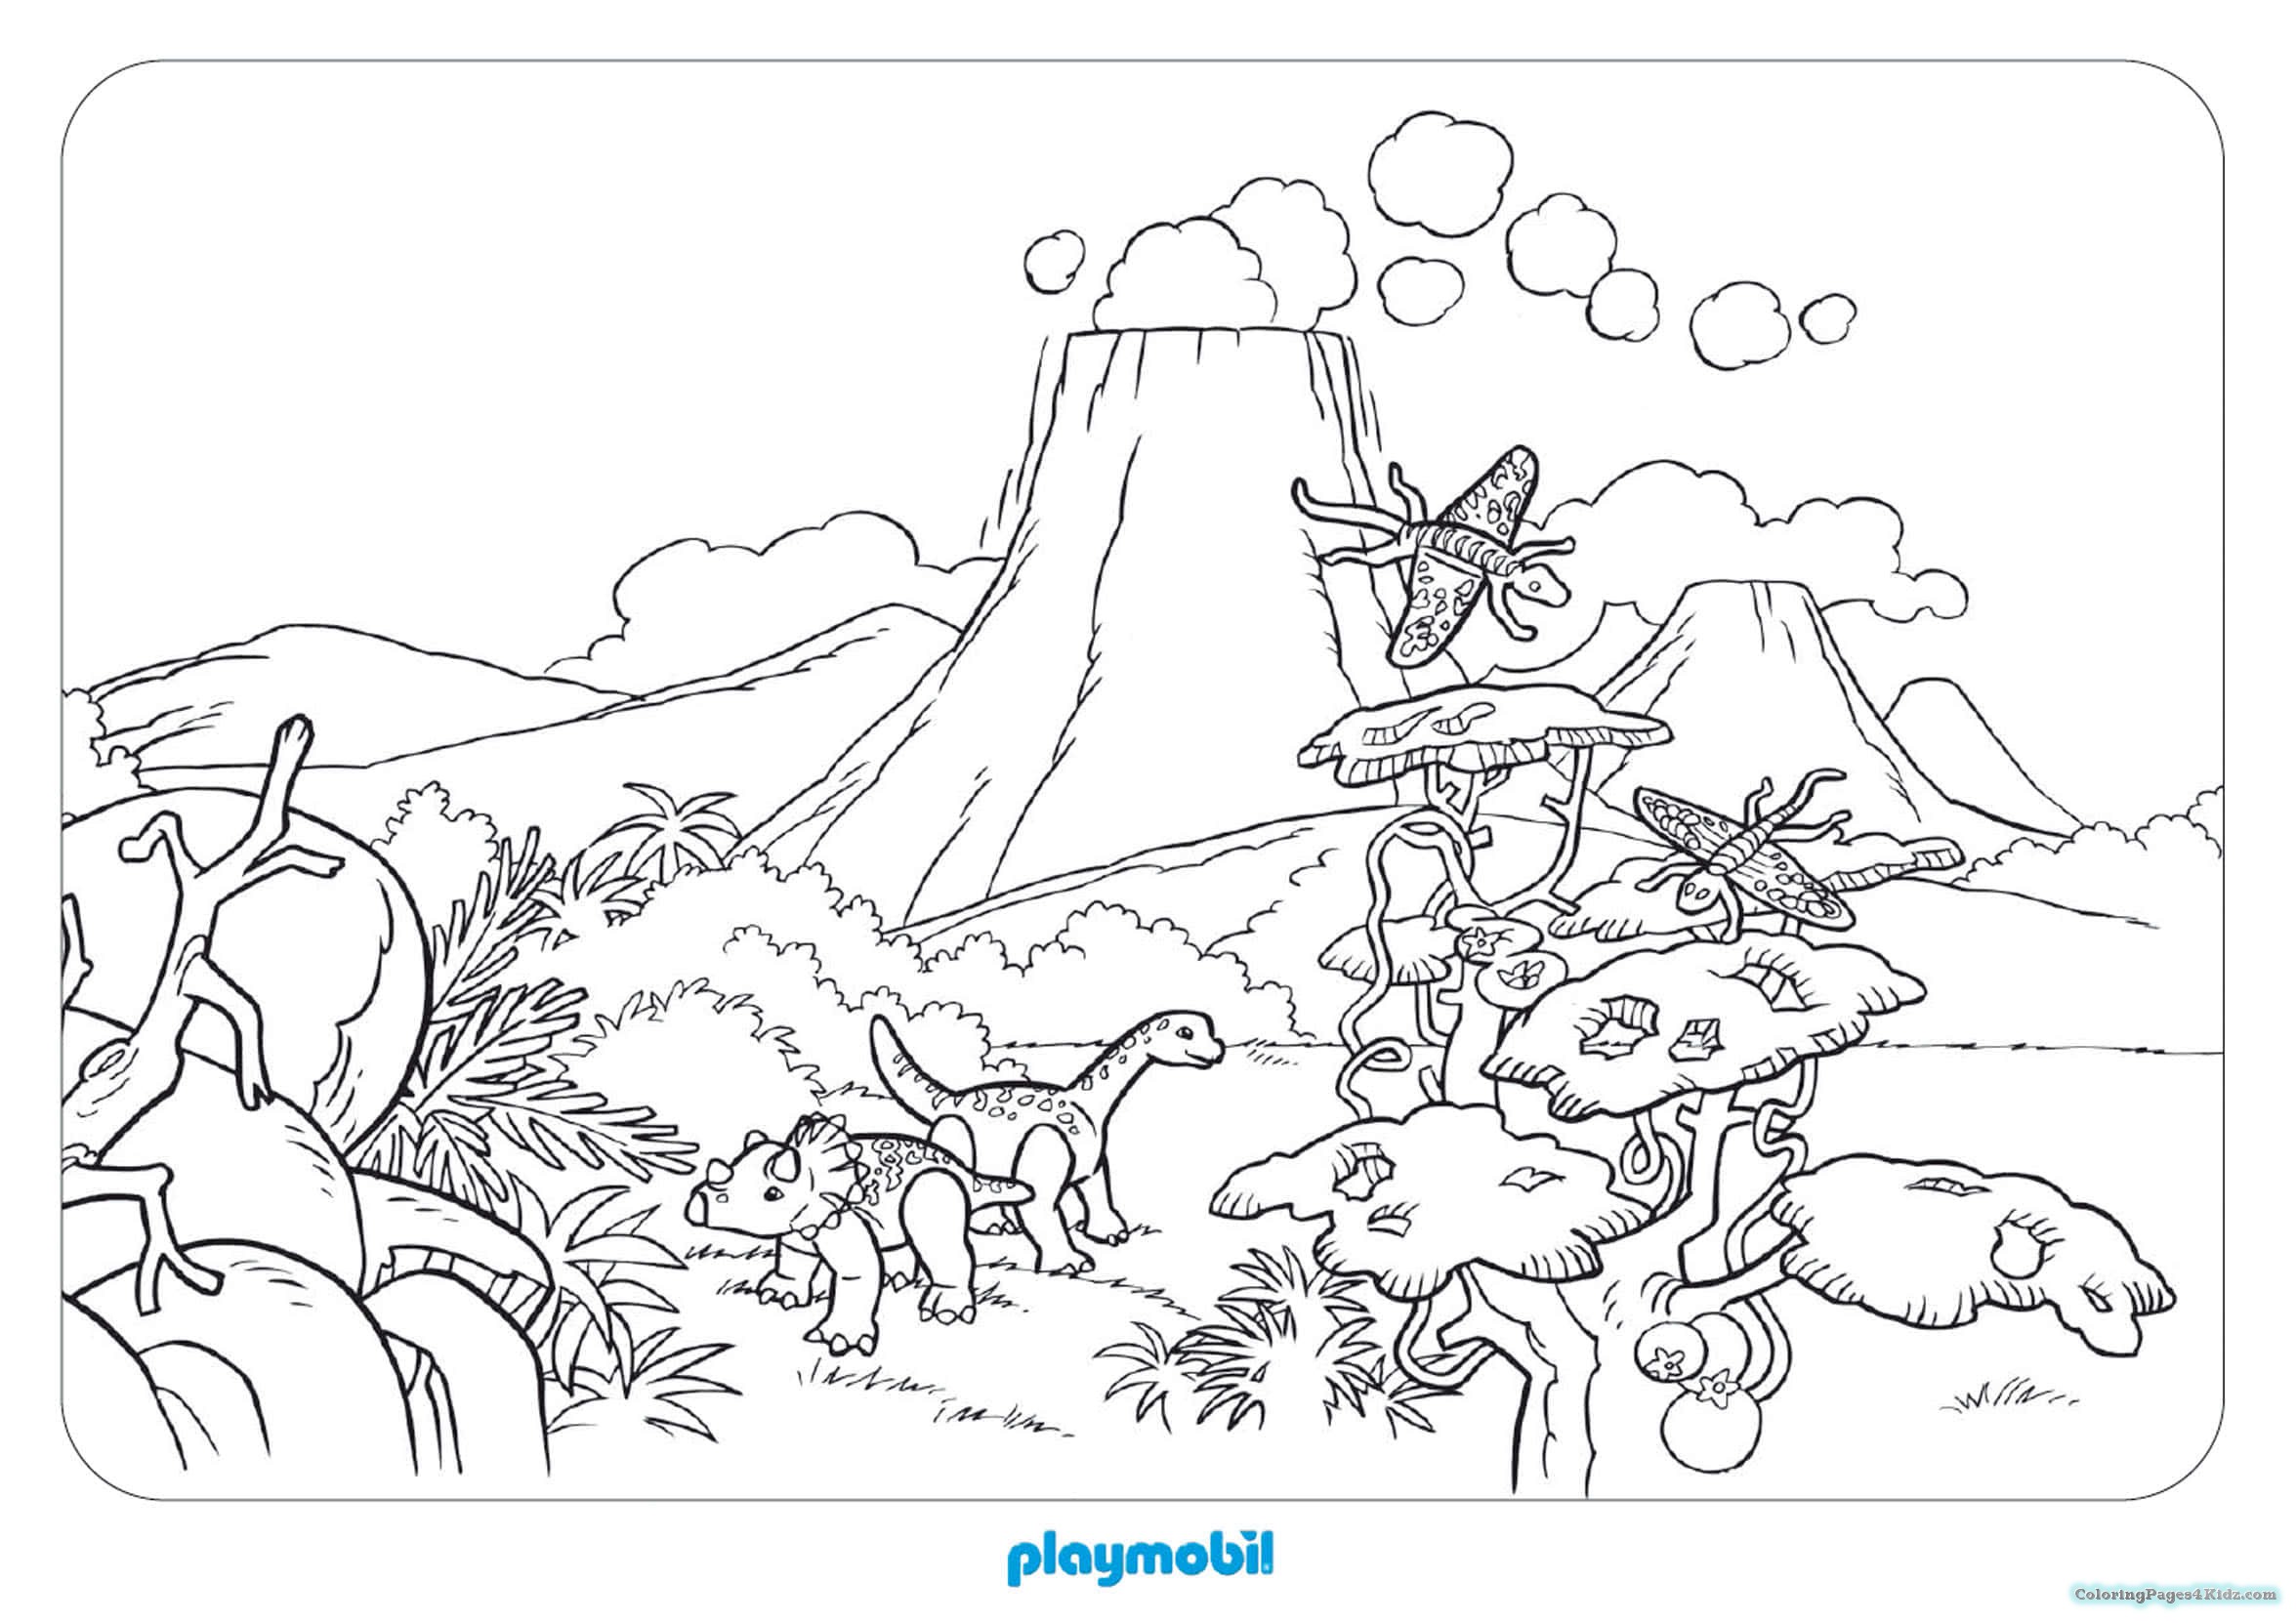 playmobil coloring pages at getdrawings  free download